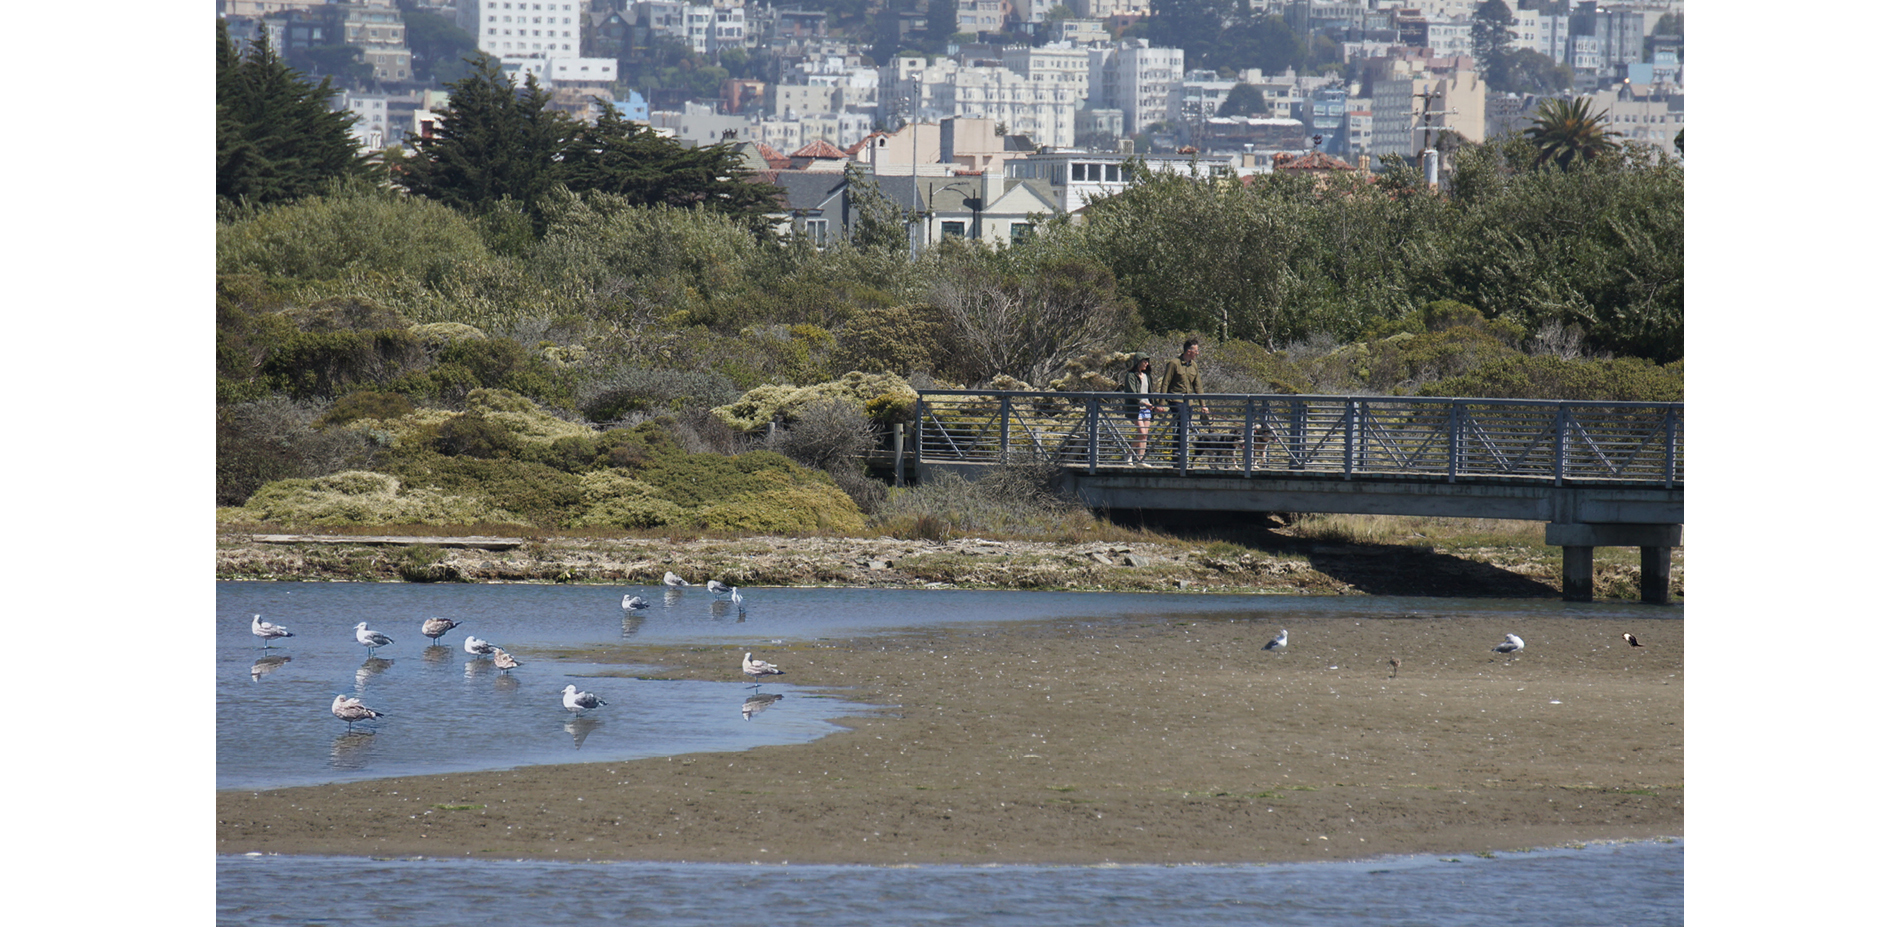 The park connects the City of San Francisco to the restored marsh.